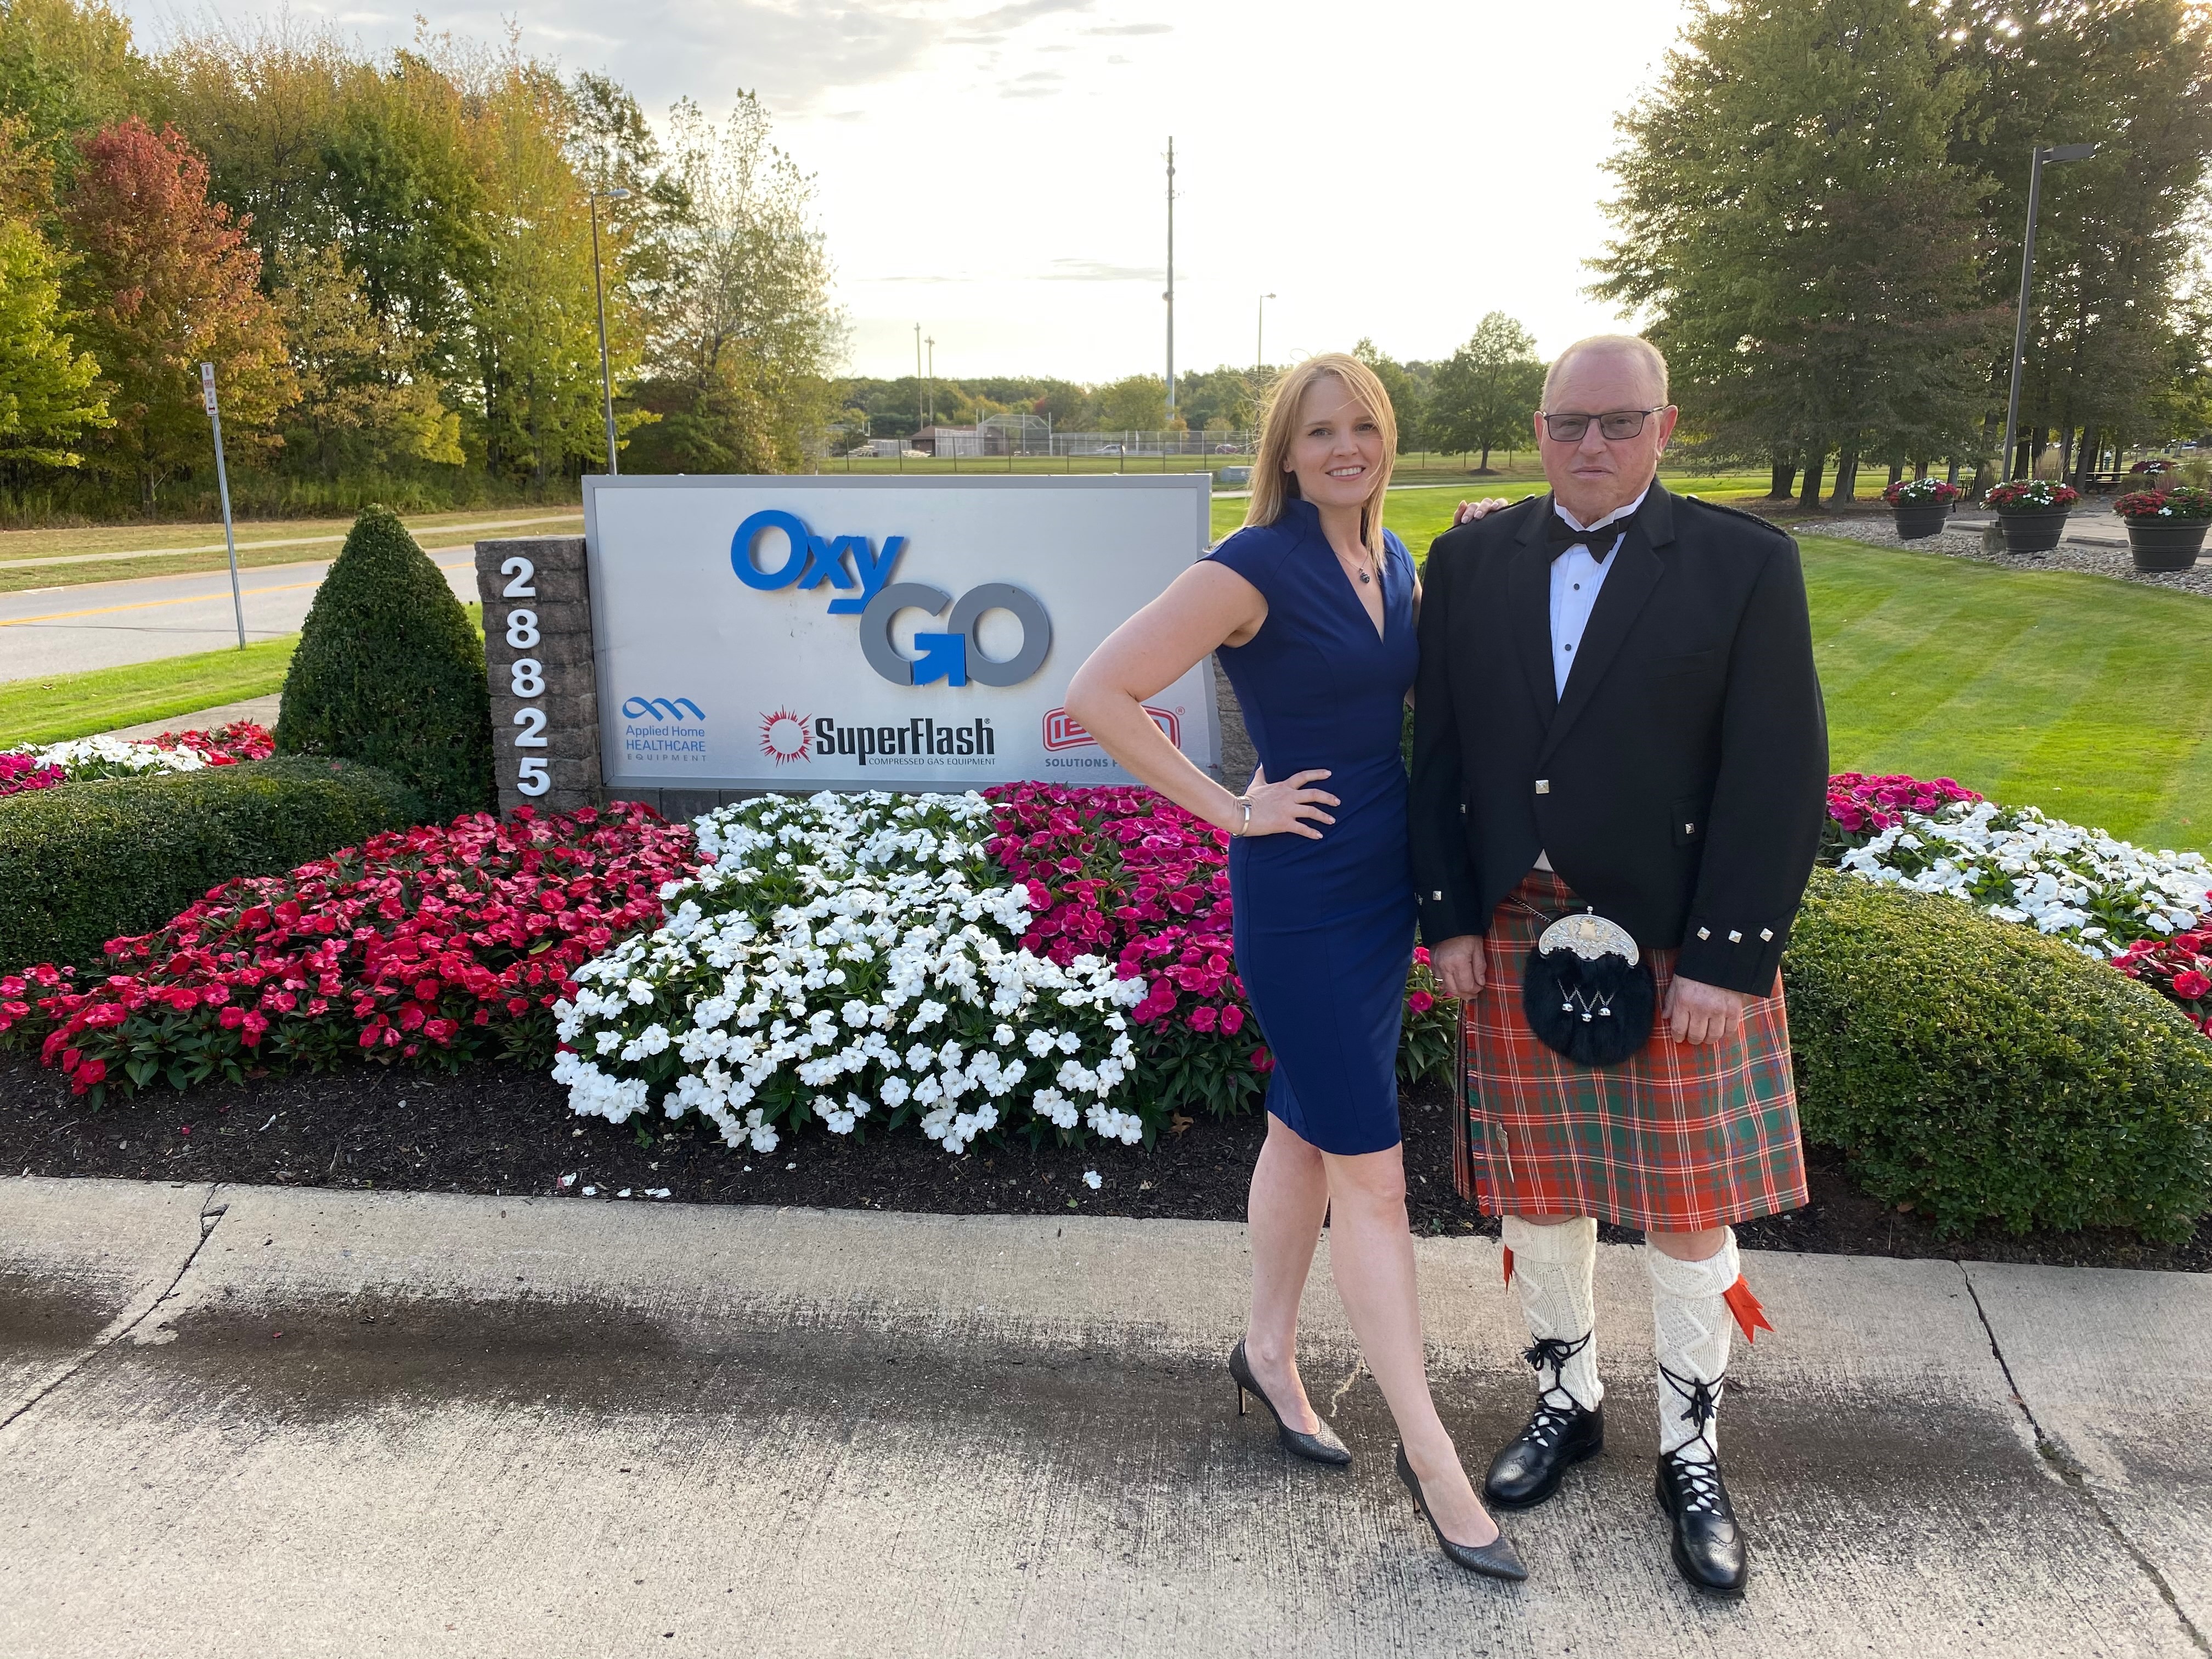  OxyGo CEO Announced as a winner in 2020 Smart 50 Awards